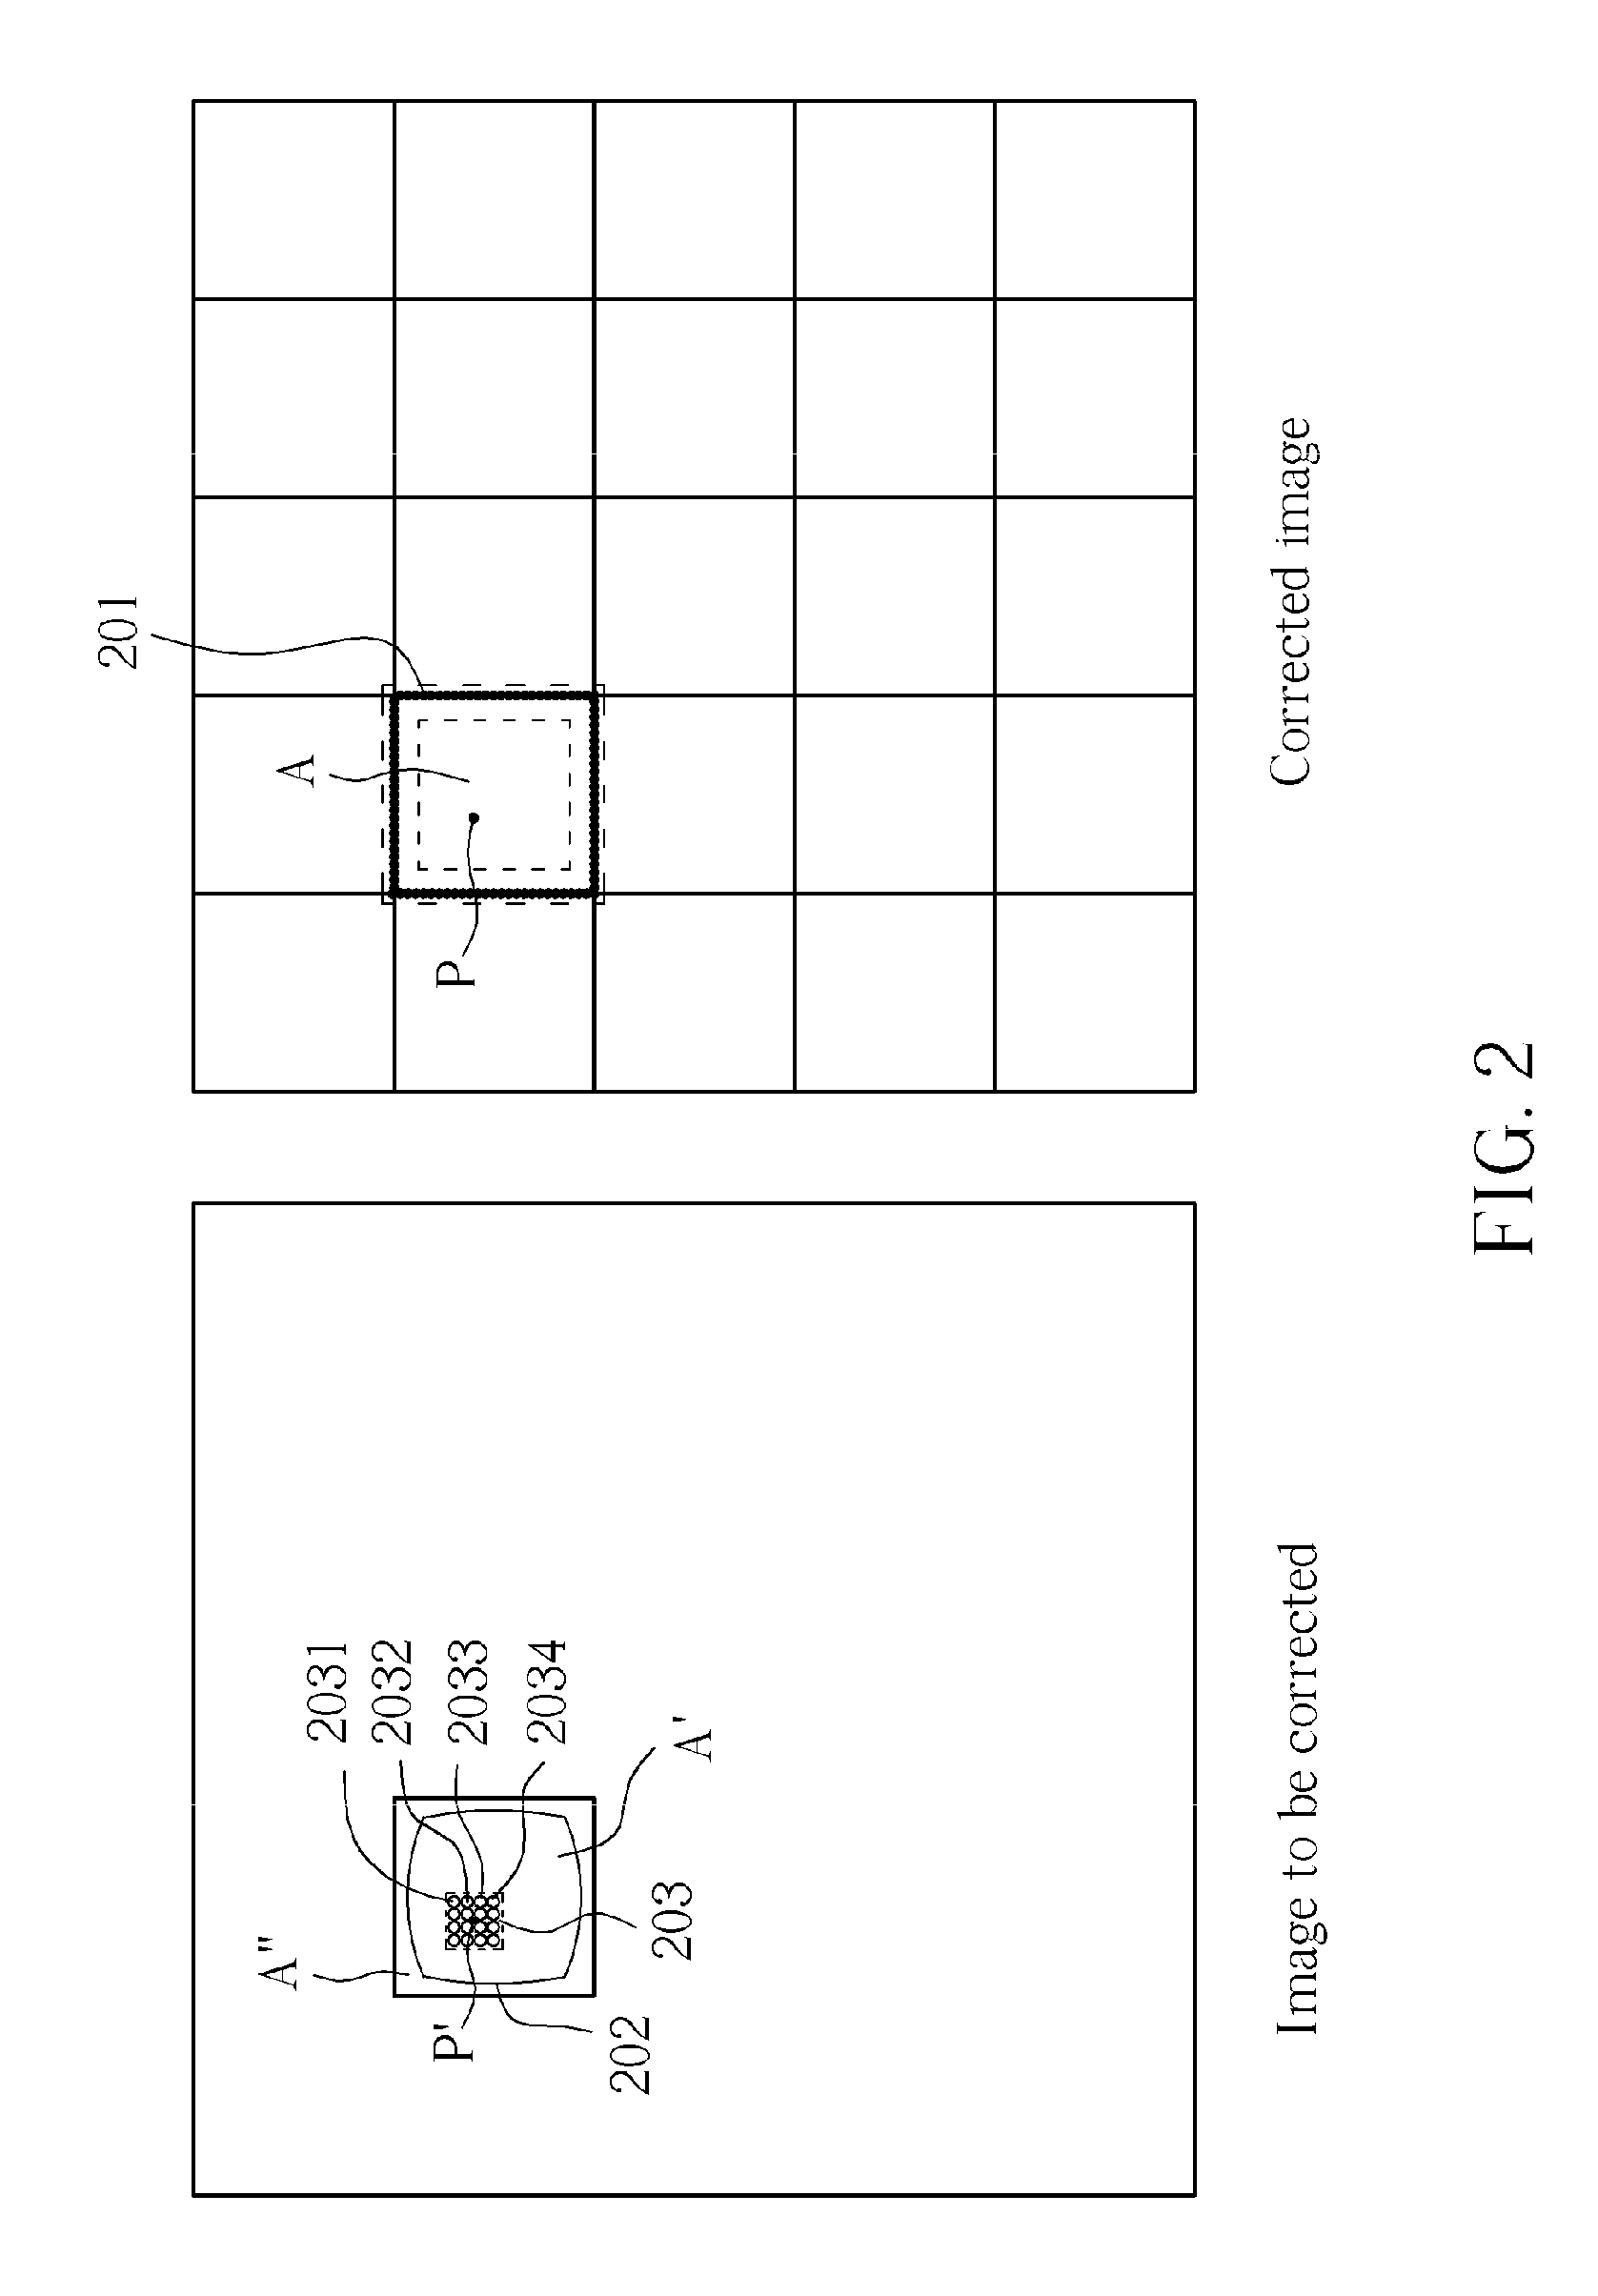 Image correction method and related image correction system thereof